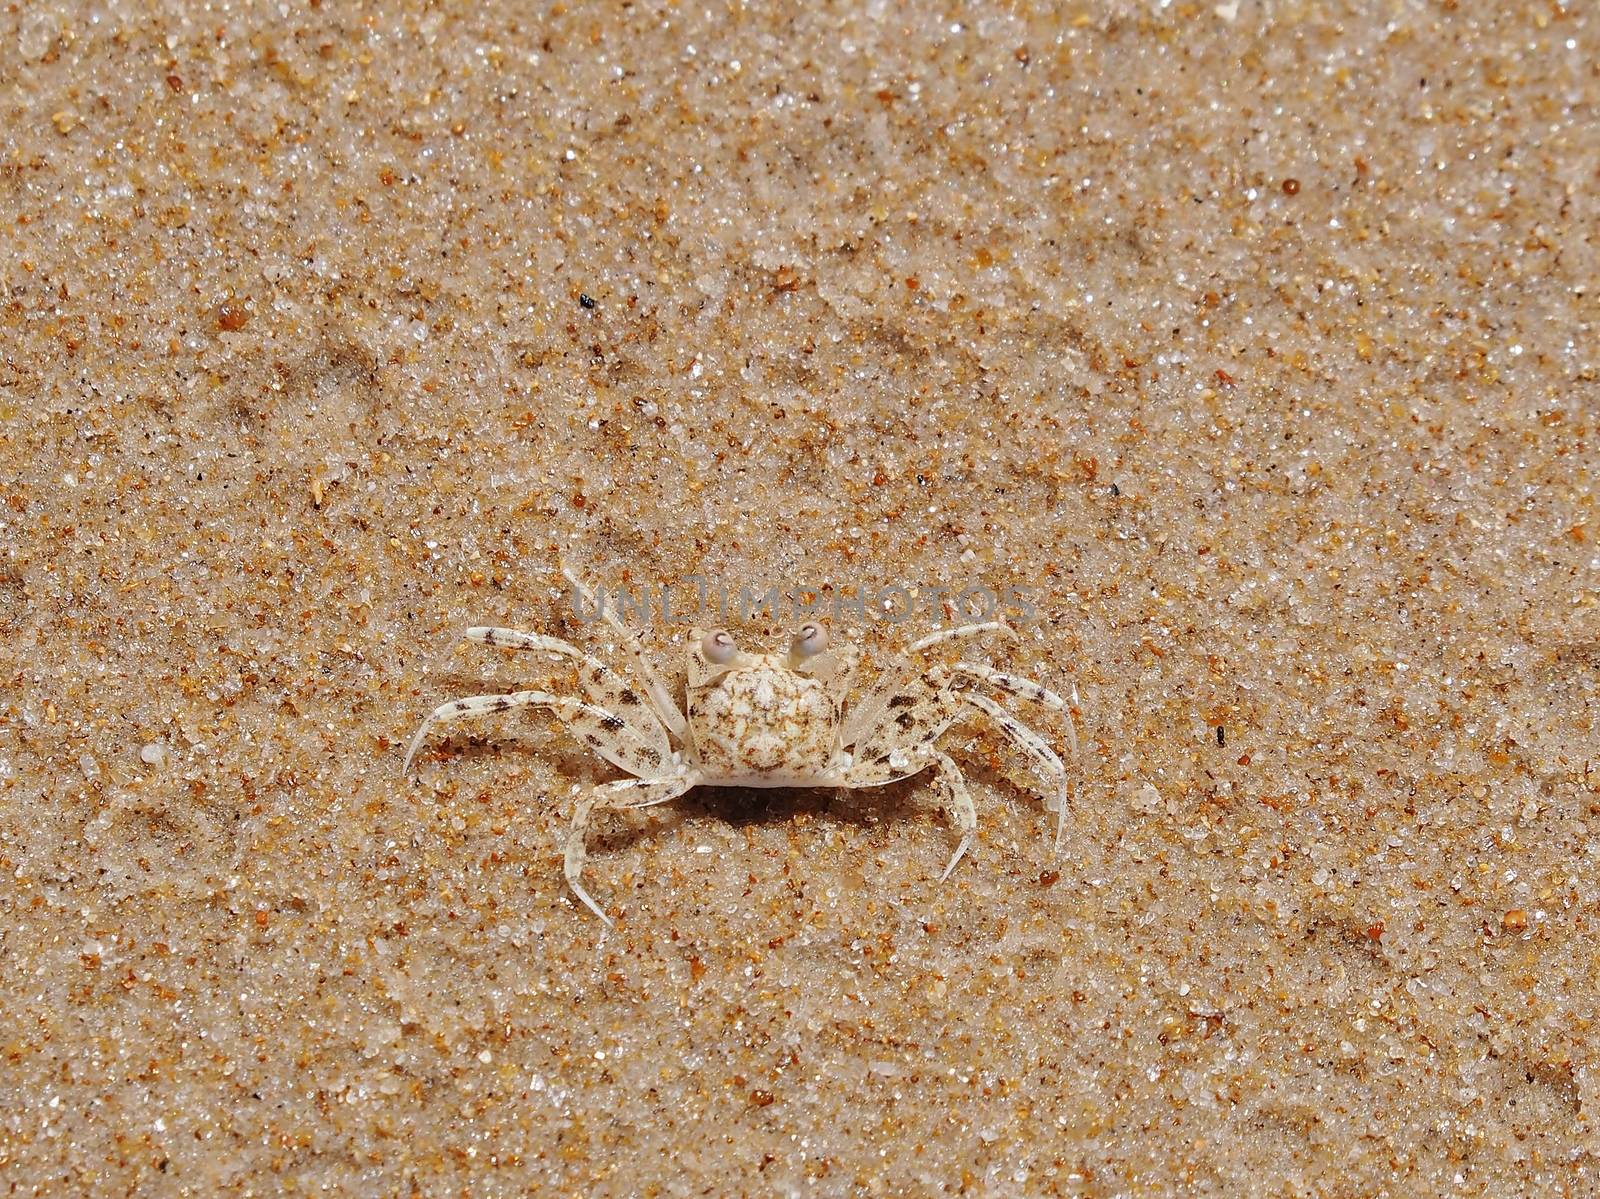 Little dotted crab on the gold sand. Photo was taken on the beach on coconut coast in the village Imbassai in Brazil.